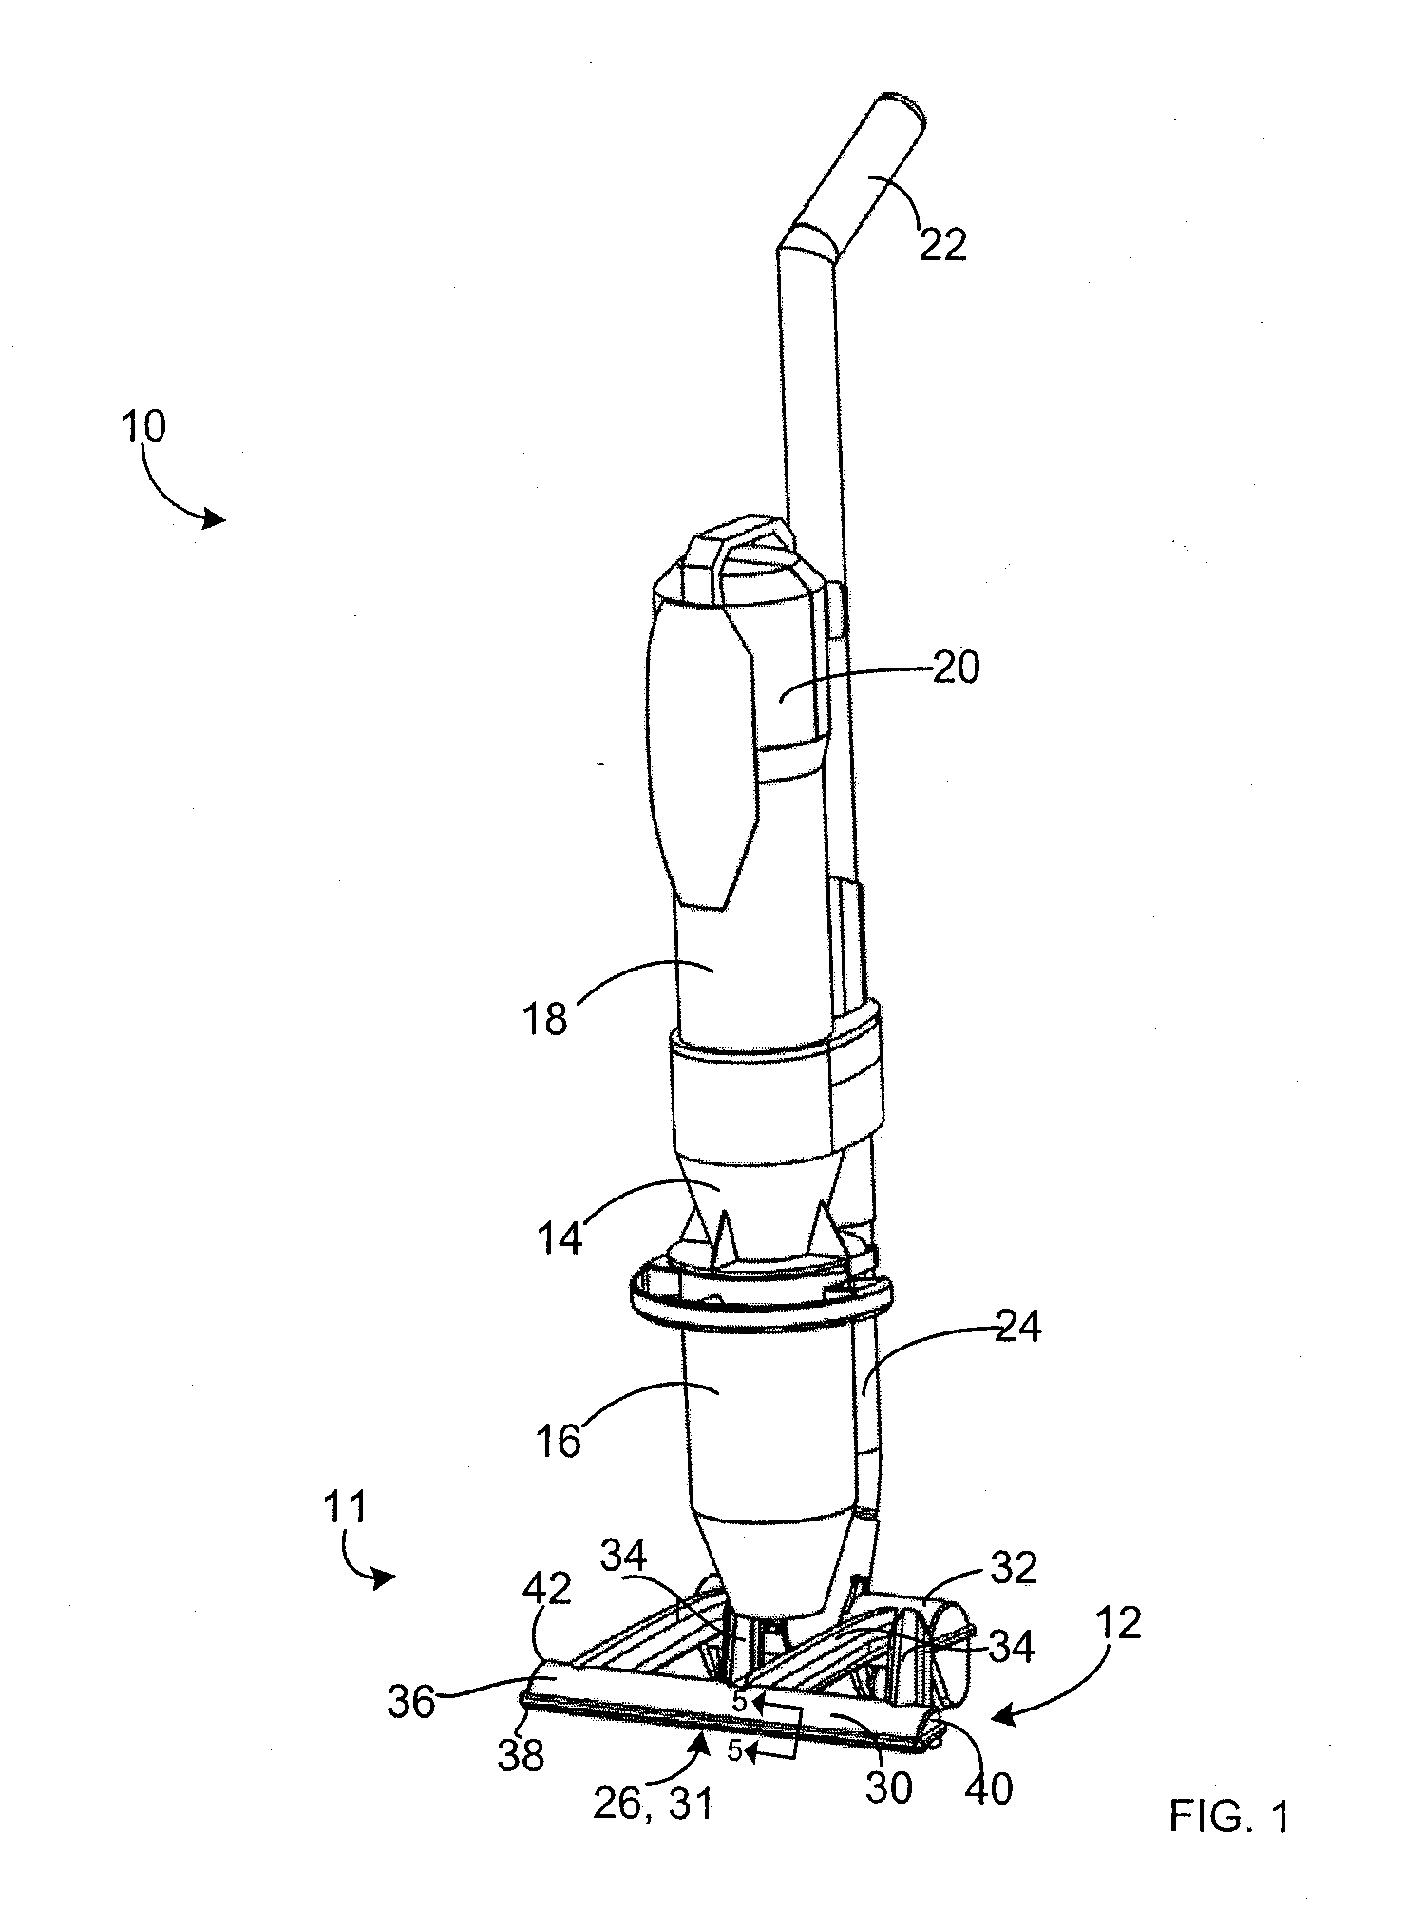 Resistively welded part for an appliance including a surface cleaning apparatus